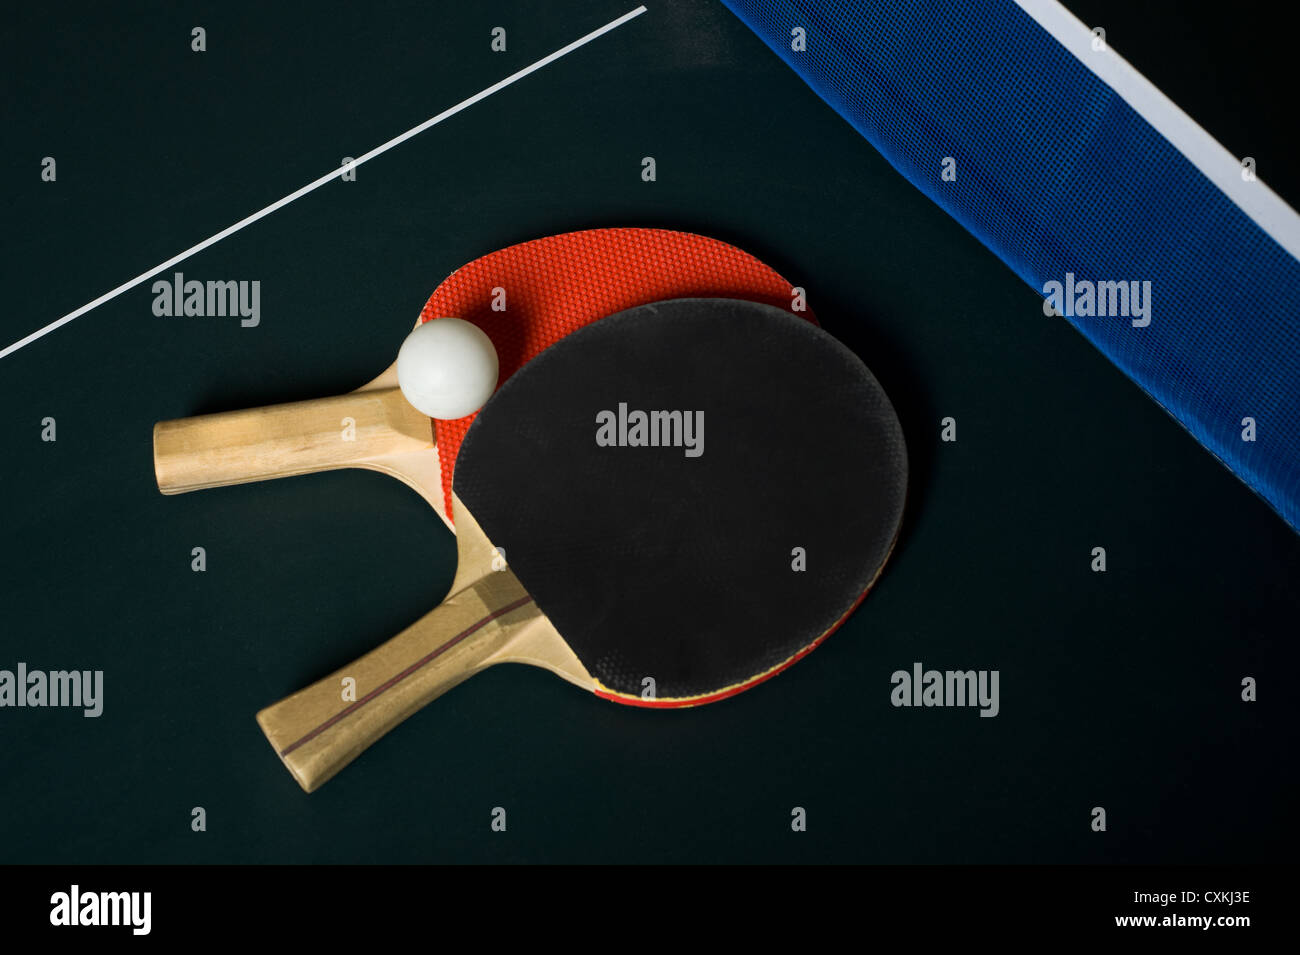 Ping pong or table tennis paddles on a table with net and a ball, with copy space Stock Photo